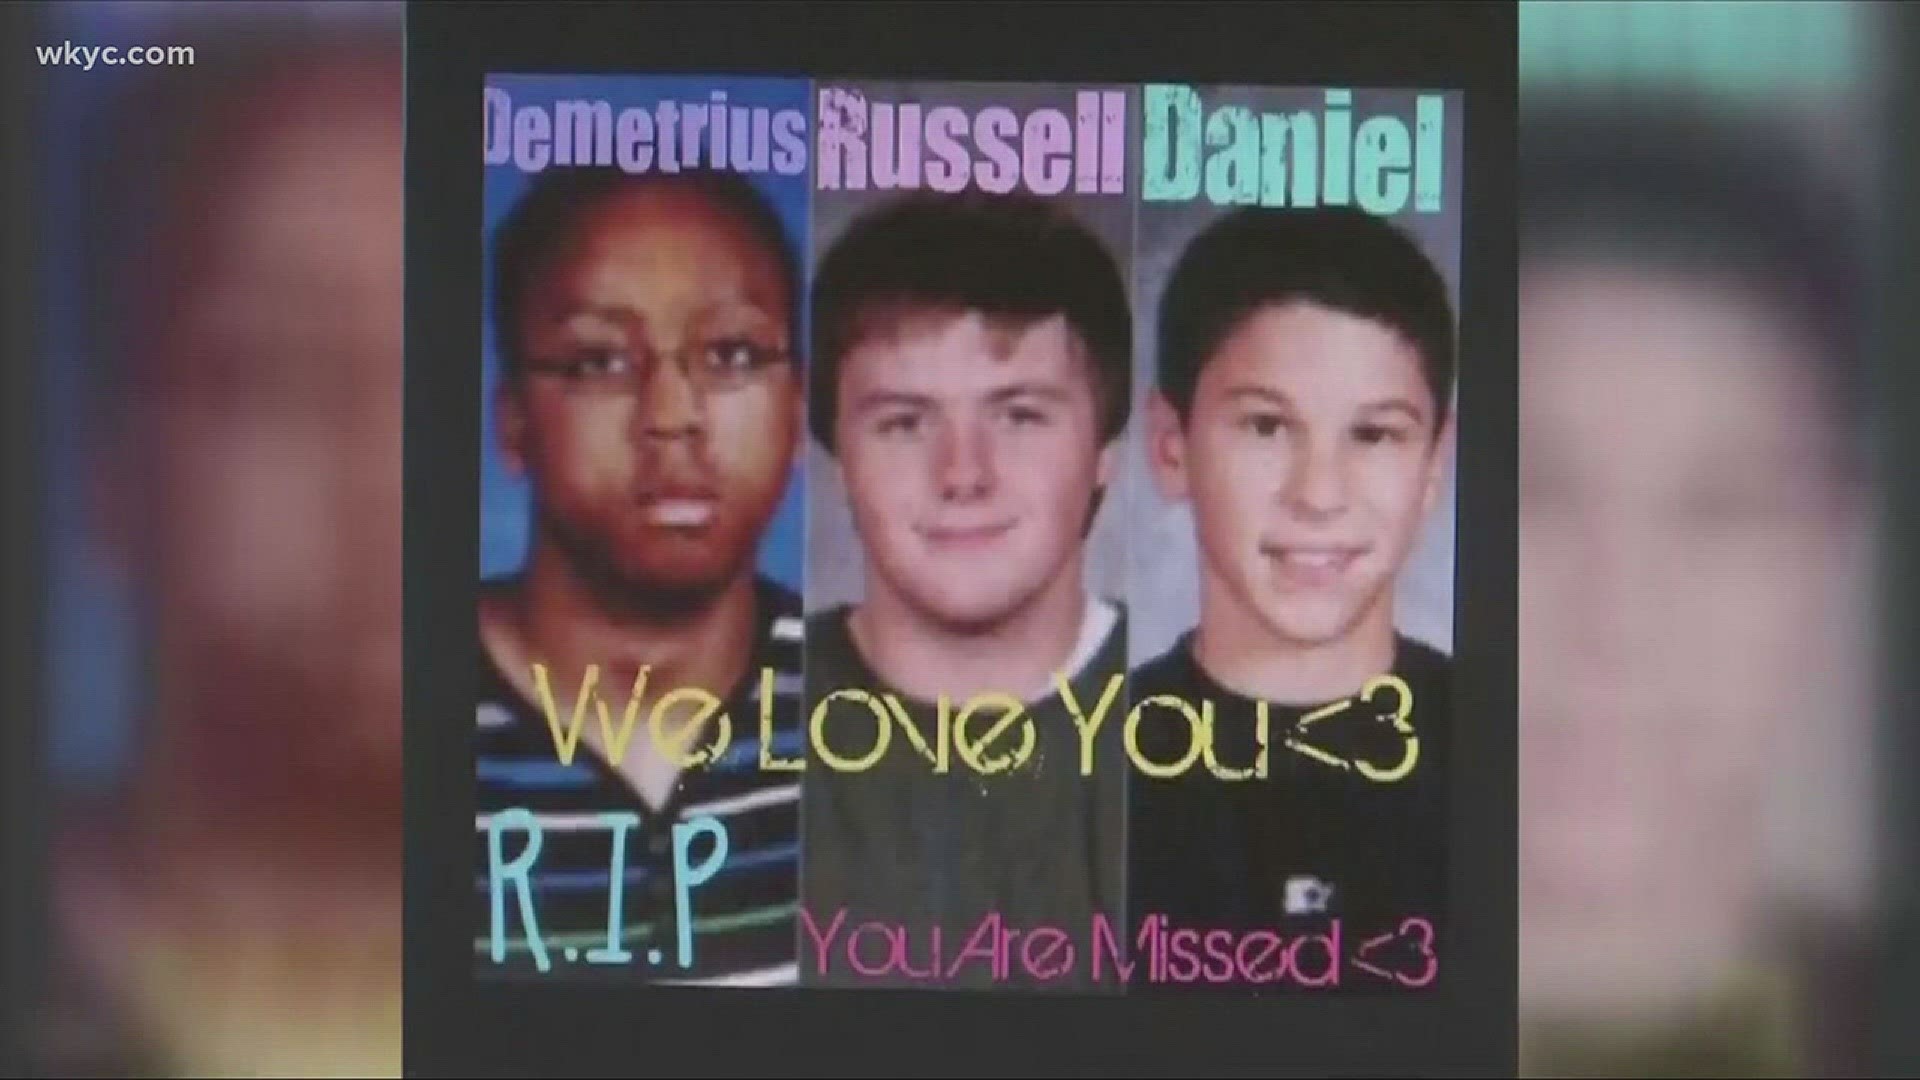 Feb. 27, 2018: It was six years ago on Feb. 27, 2012 that gunfire rang out inside the Chardon High School cafeteria. Three students died: Danny Parmertor, 16; Demetrius Hewlin, 16; and Russell King Jr. 17. Two others -- Joy Rickers and Nick Walczak -- wer